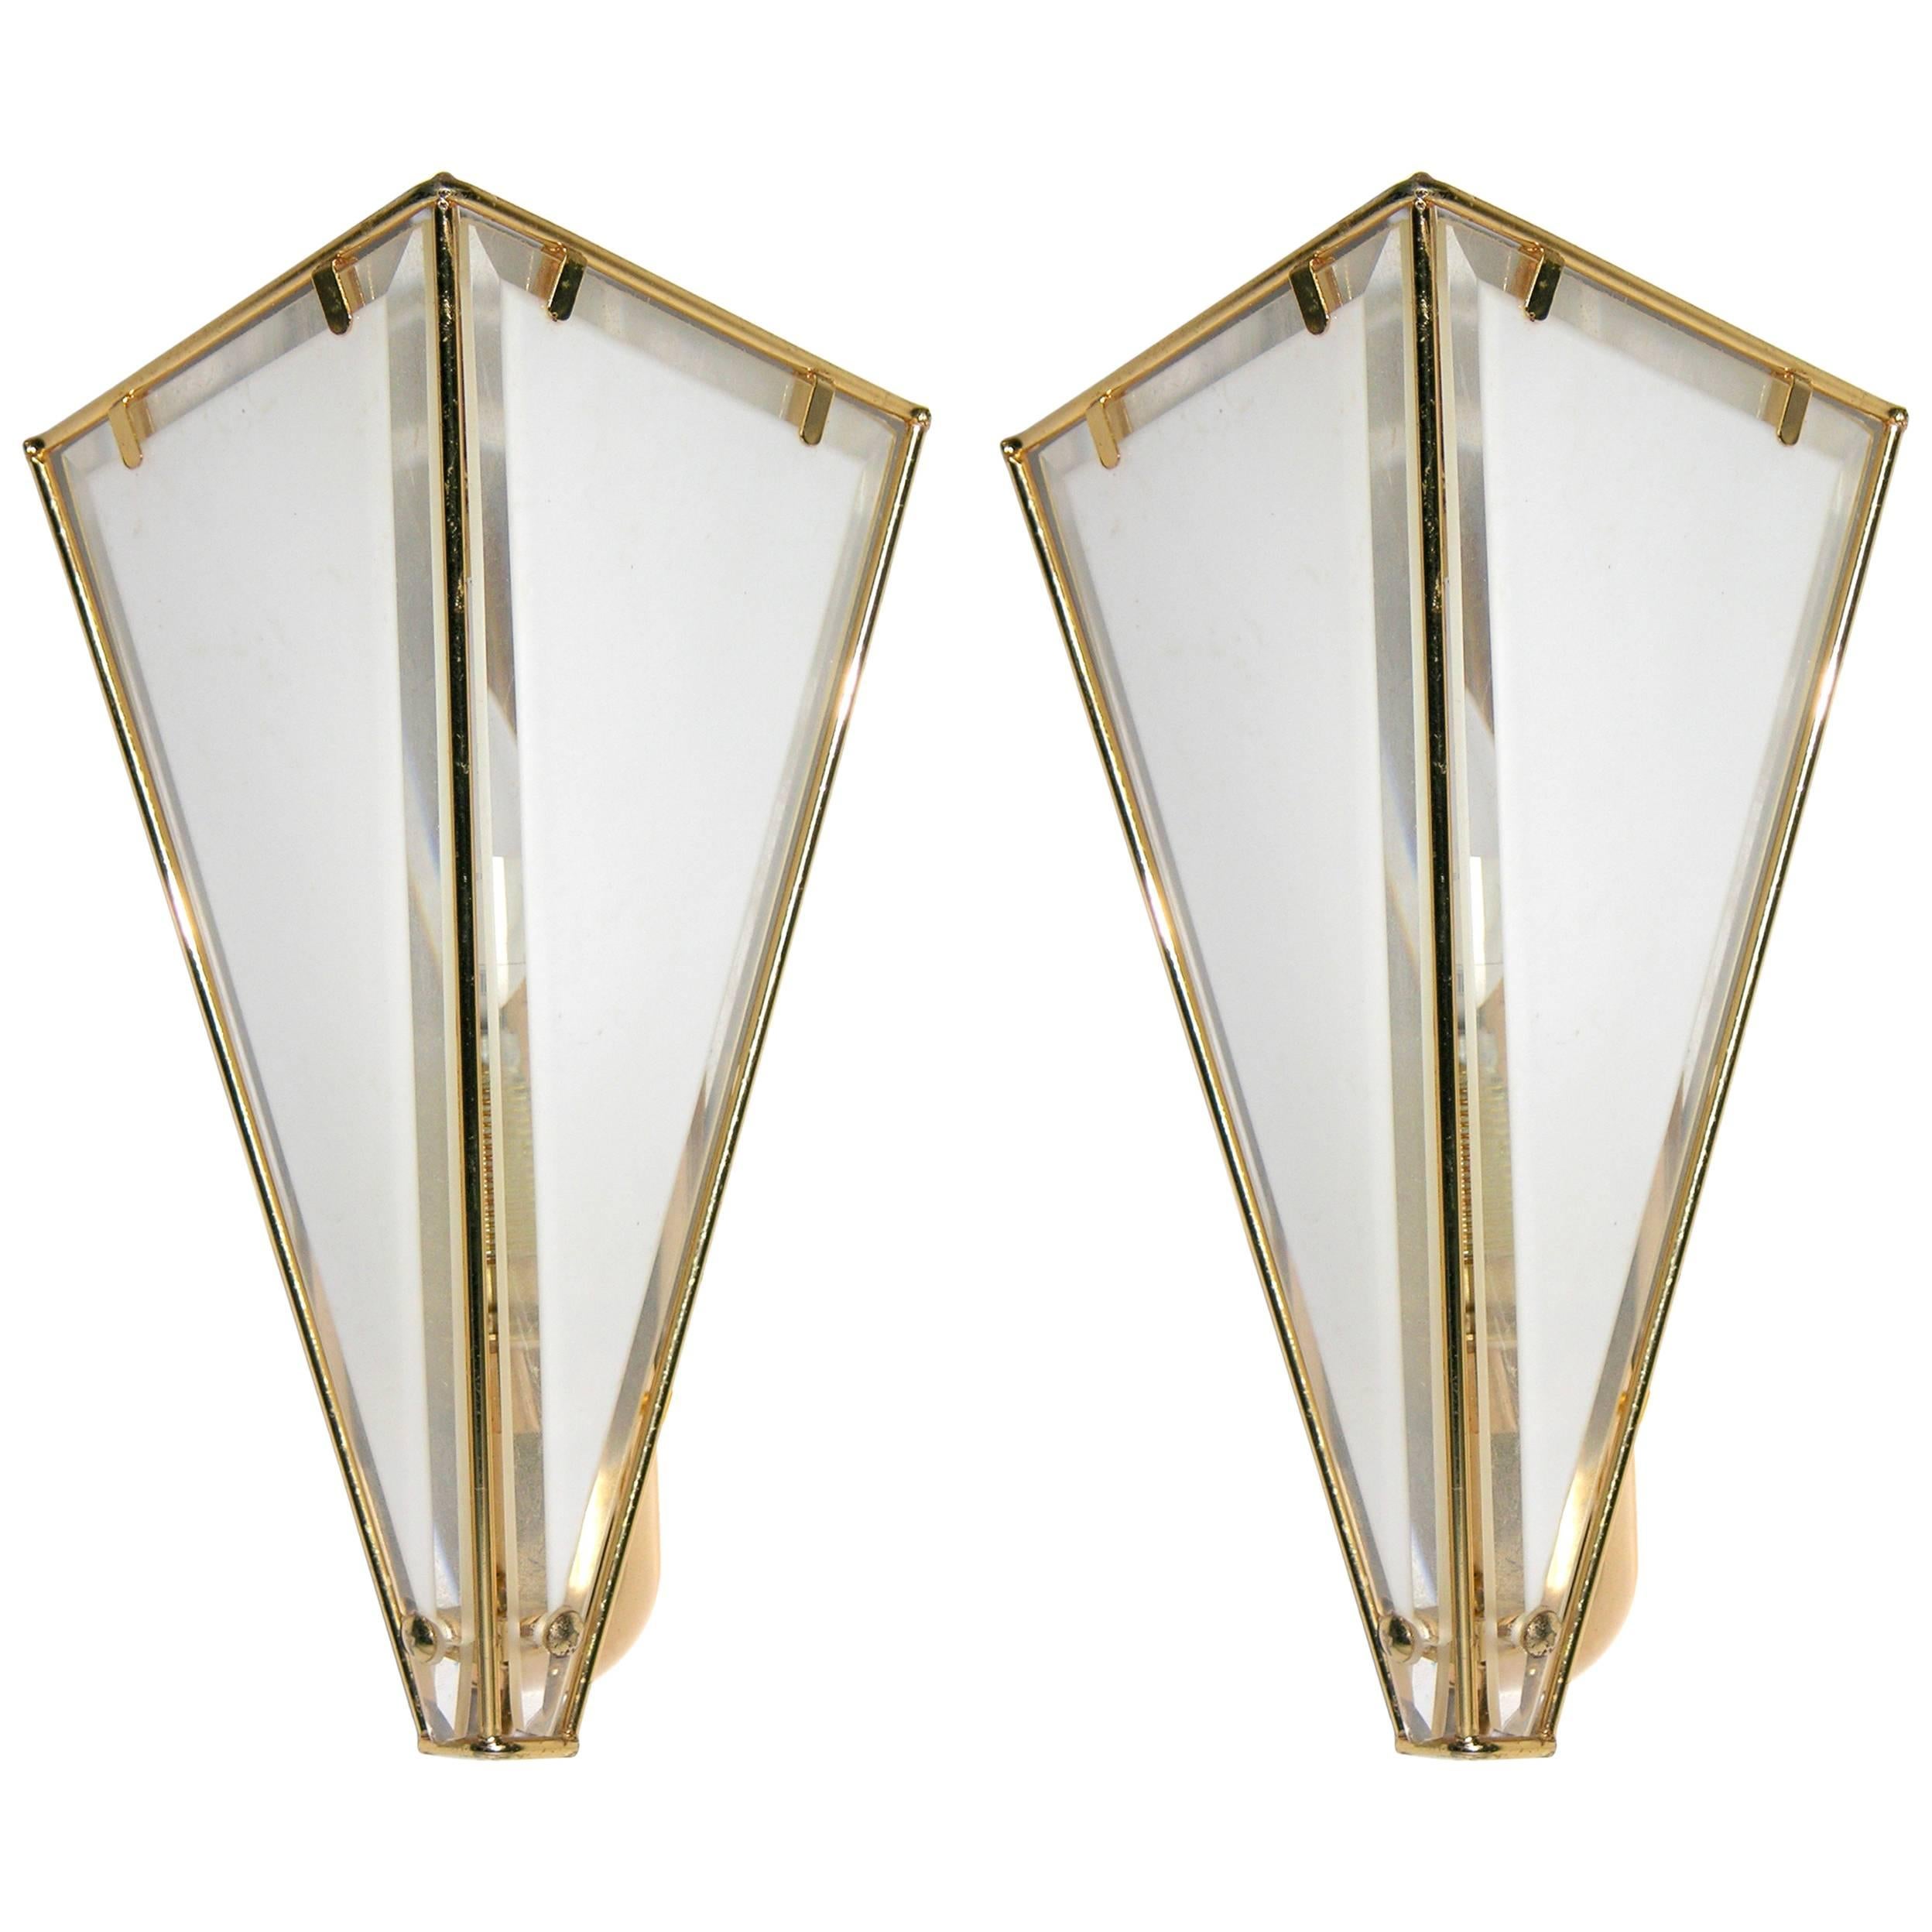 1980 Metalarte Pair of Brass and White Frosted Glass Triangular Wall Lights